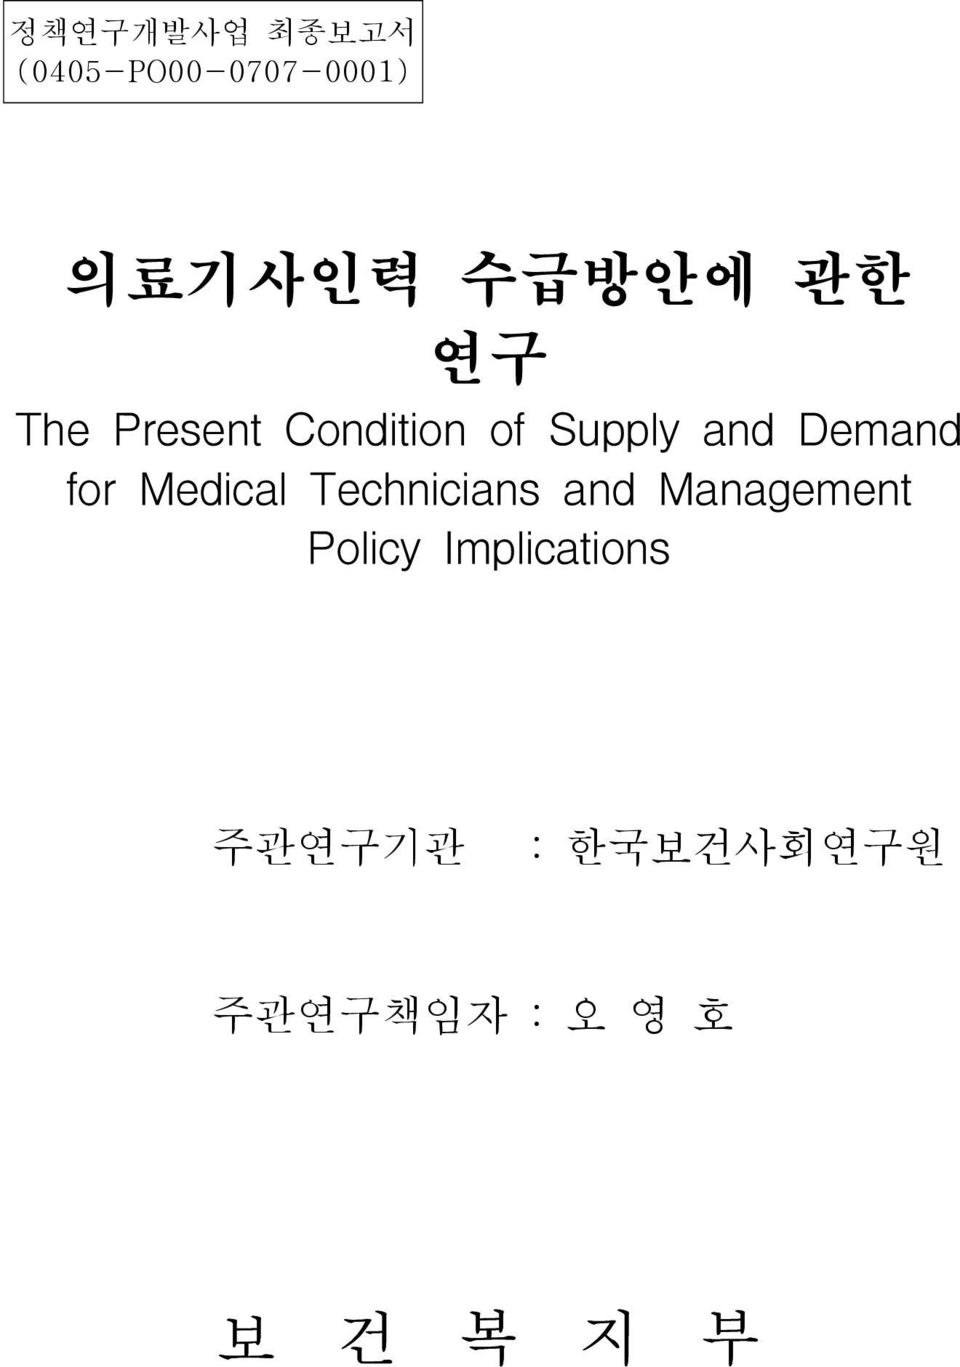 for Medical Technicians and Management Policy